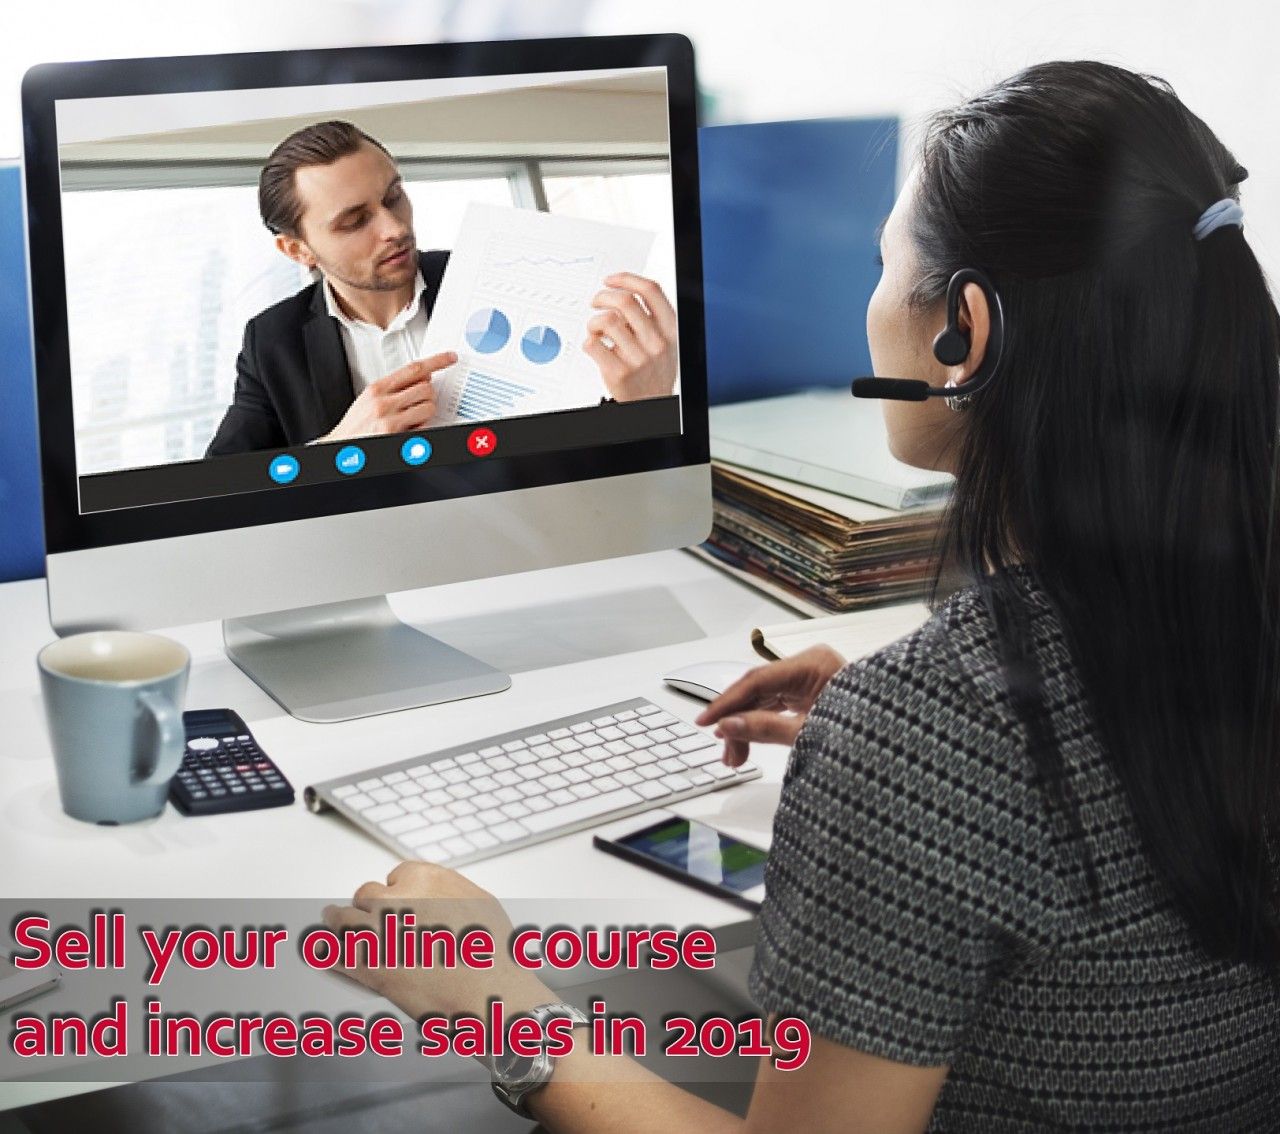 Proven strategies to sell your online course and increase sales in 2019